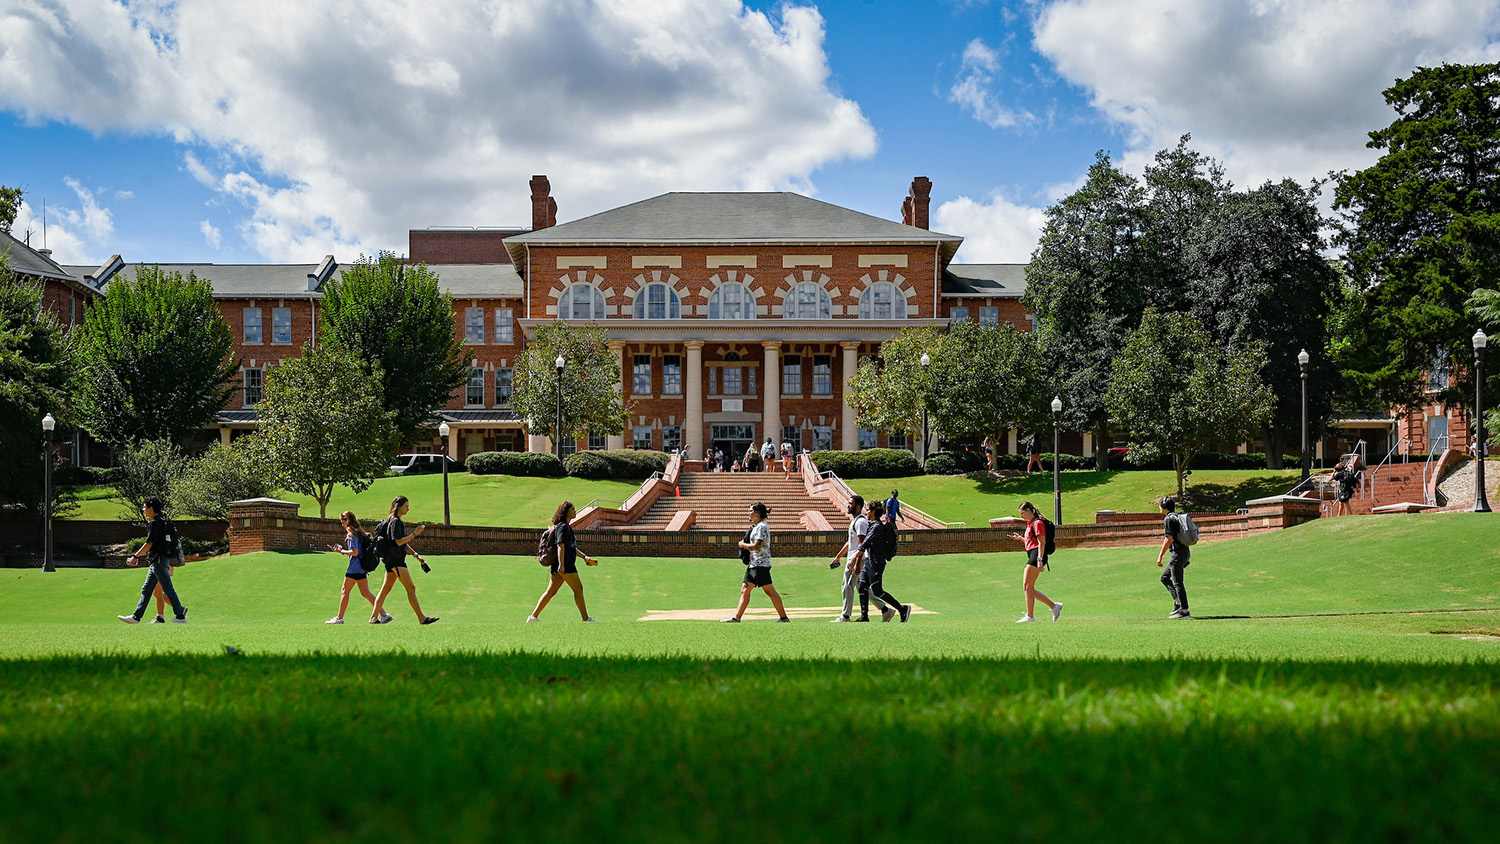 Students make their way to class early in the 2022 fall semester across the Court of North Carolina, with the 1911 Building as a backdrop. Photo by Becky Kirkland.